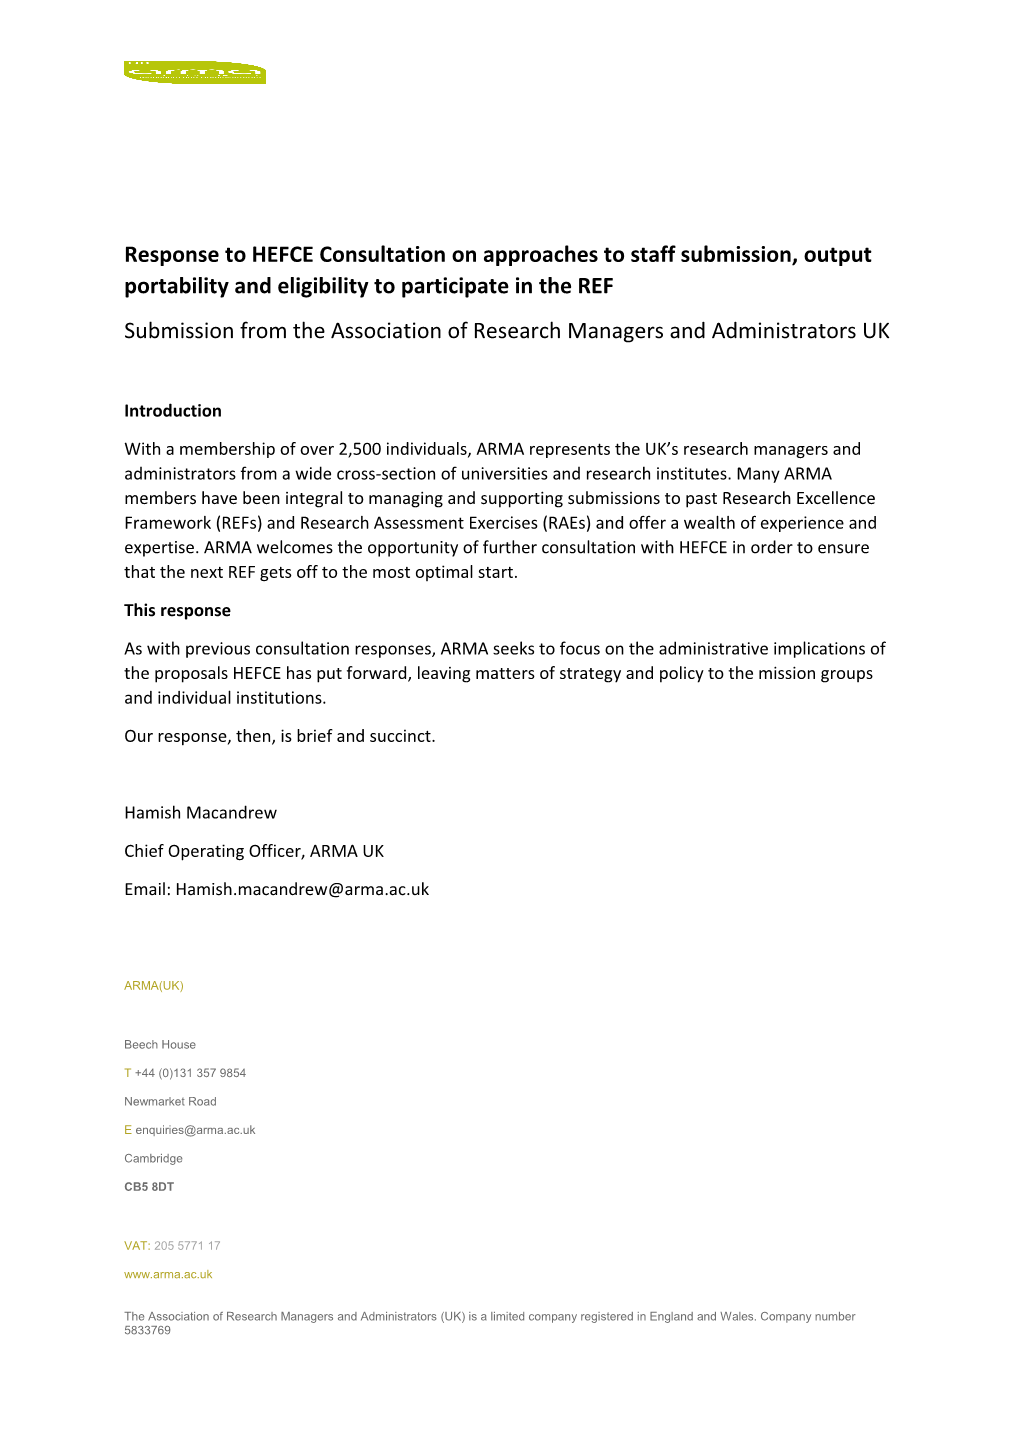 Response to HEFCE Consultation on Approaches to Staff Submission, Output Portability And